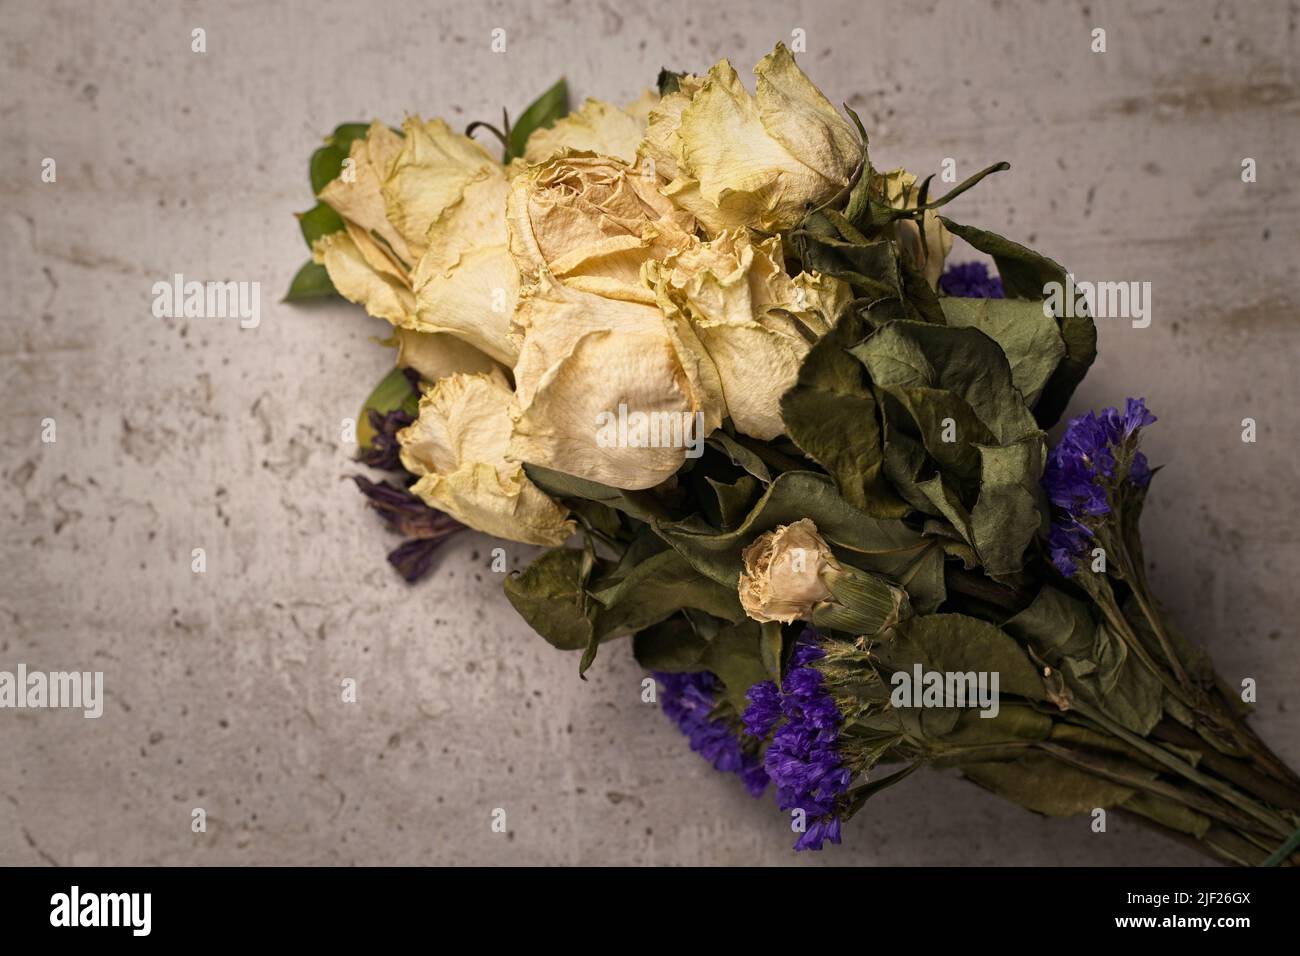 A studio photo of a bouquet of dried yellow roses on a table. Stock Photo